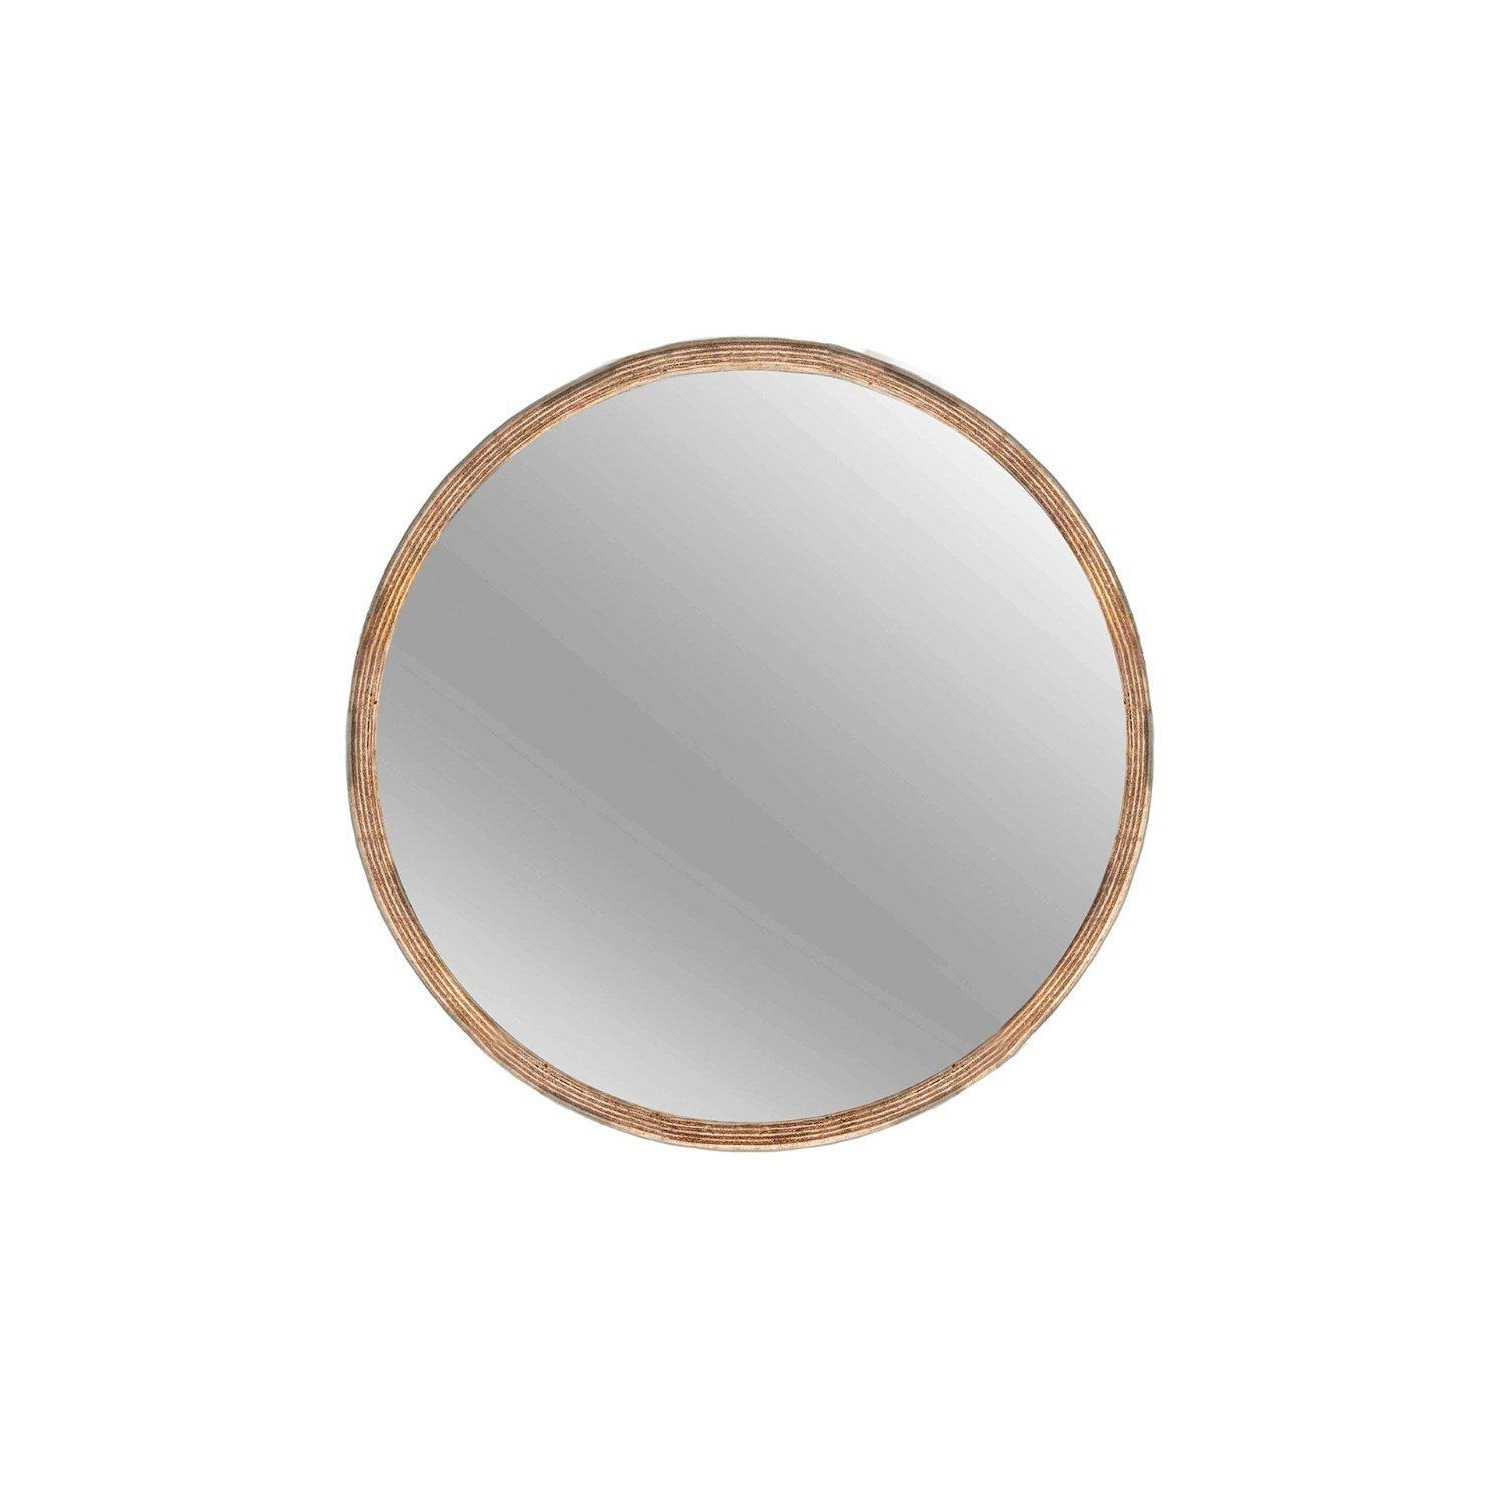 Mauro Round Bedroom Wall Mirror Living Room Mirror Natural Wood Finish - 40cm - image 1